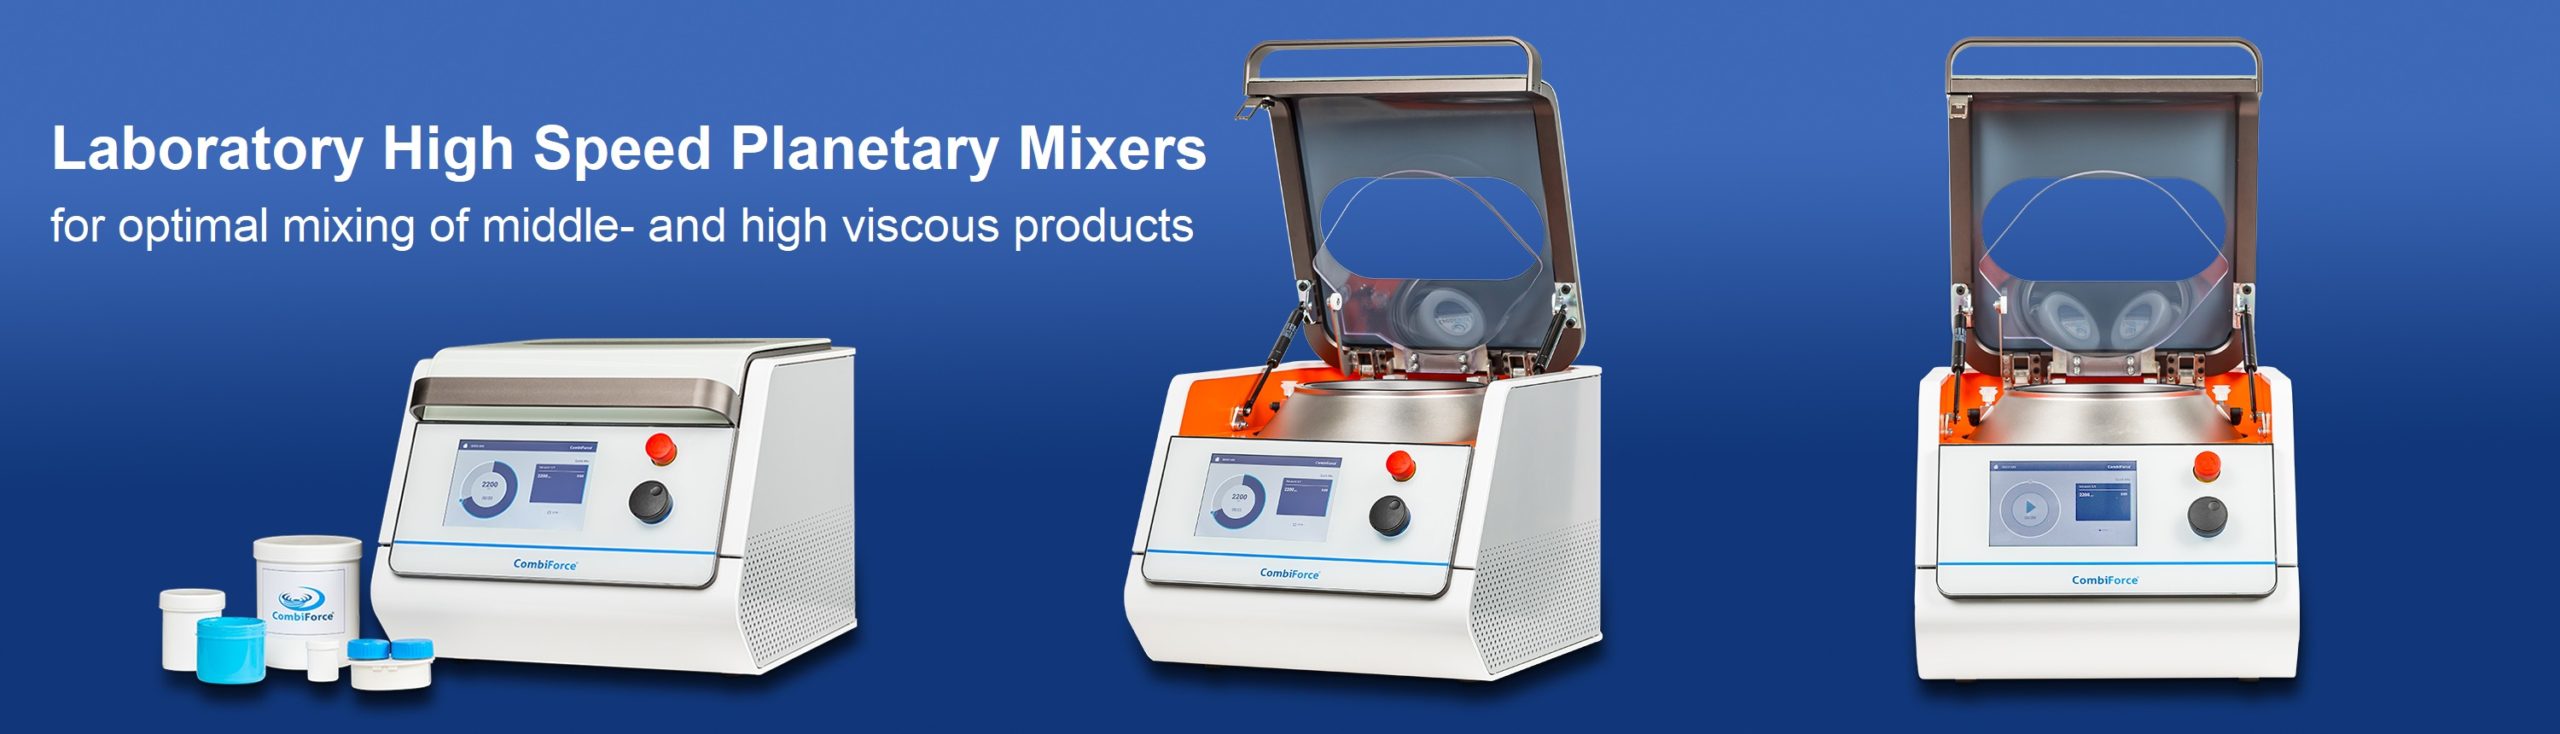 High Speed Laboratory Mixers for optimal mixing of middle and high viscosity products